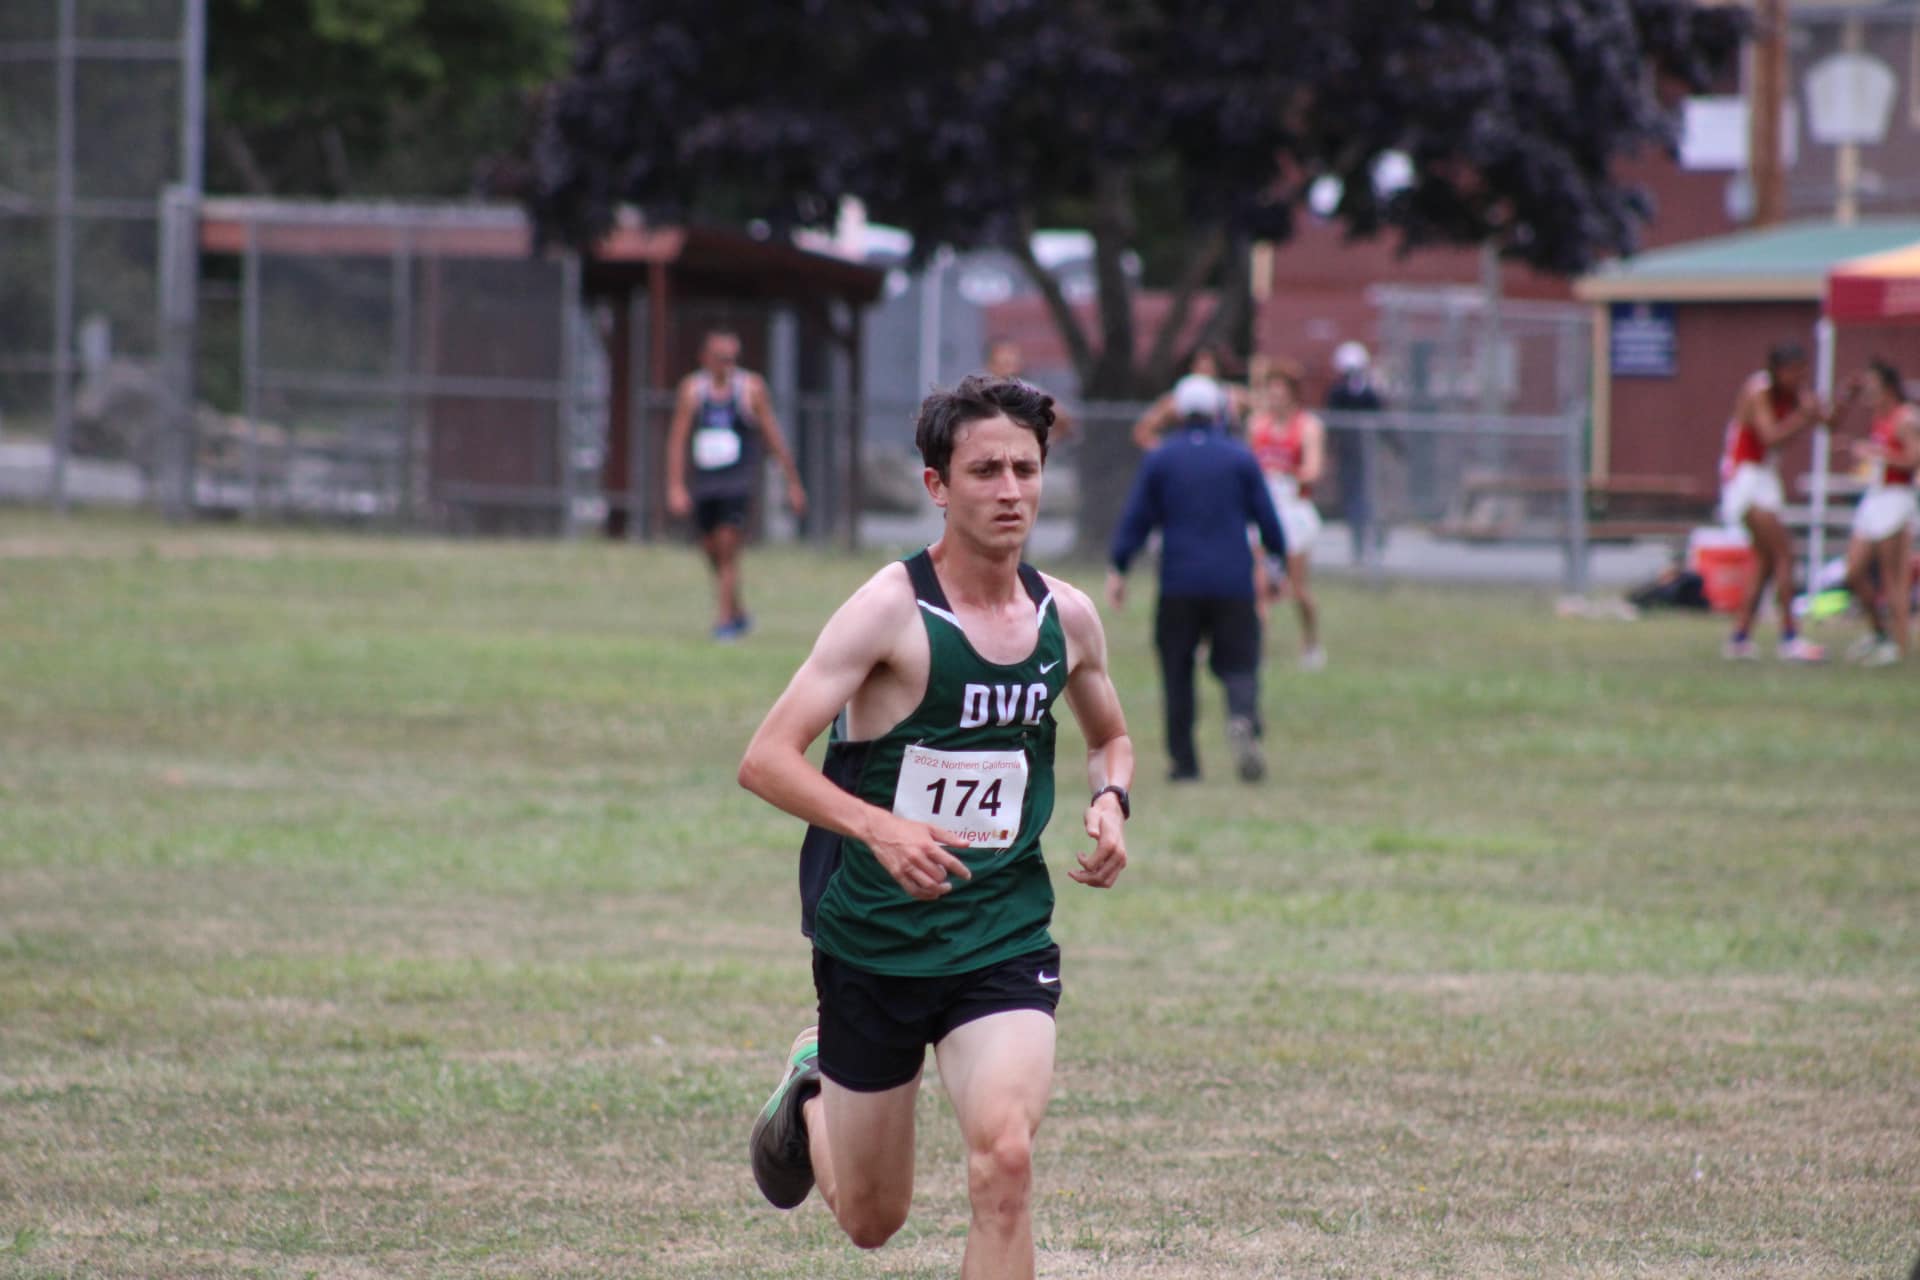 Men's Cross Country finishes 3rd at Pat ryan Invitational